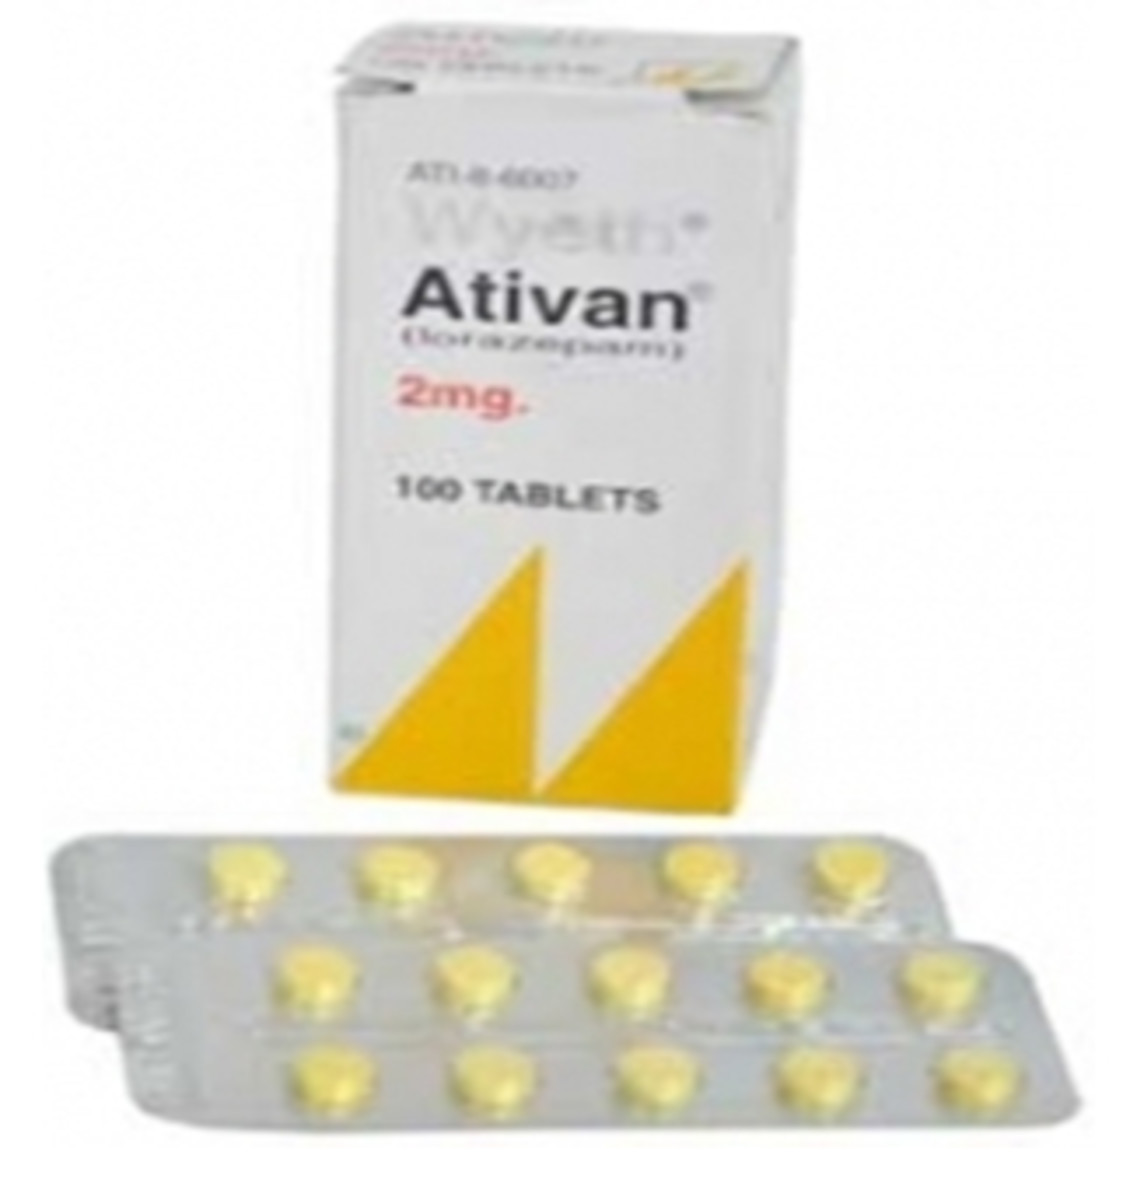 Ativan, pictured here, is one of the fastest-acting anti-anxiety medications.